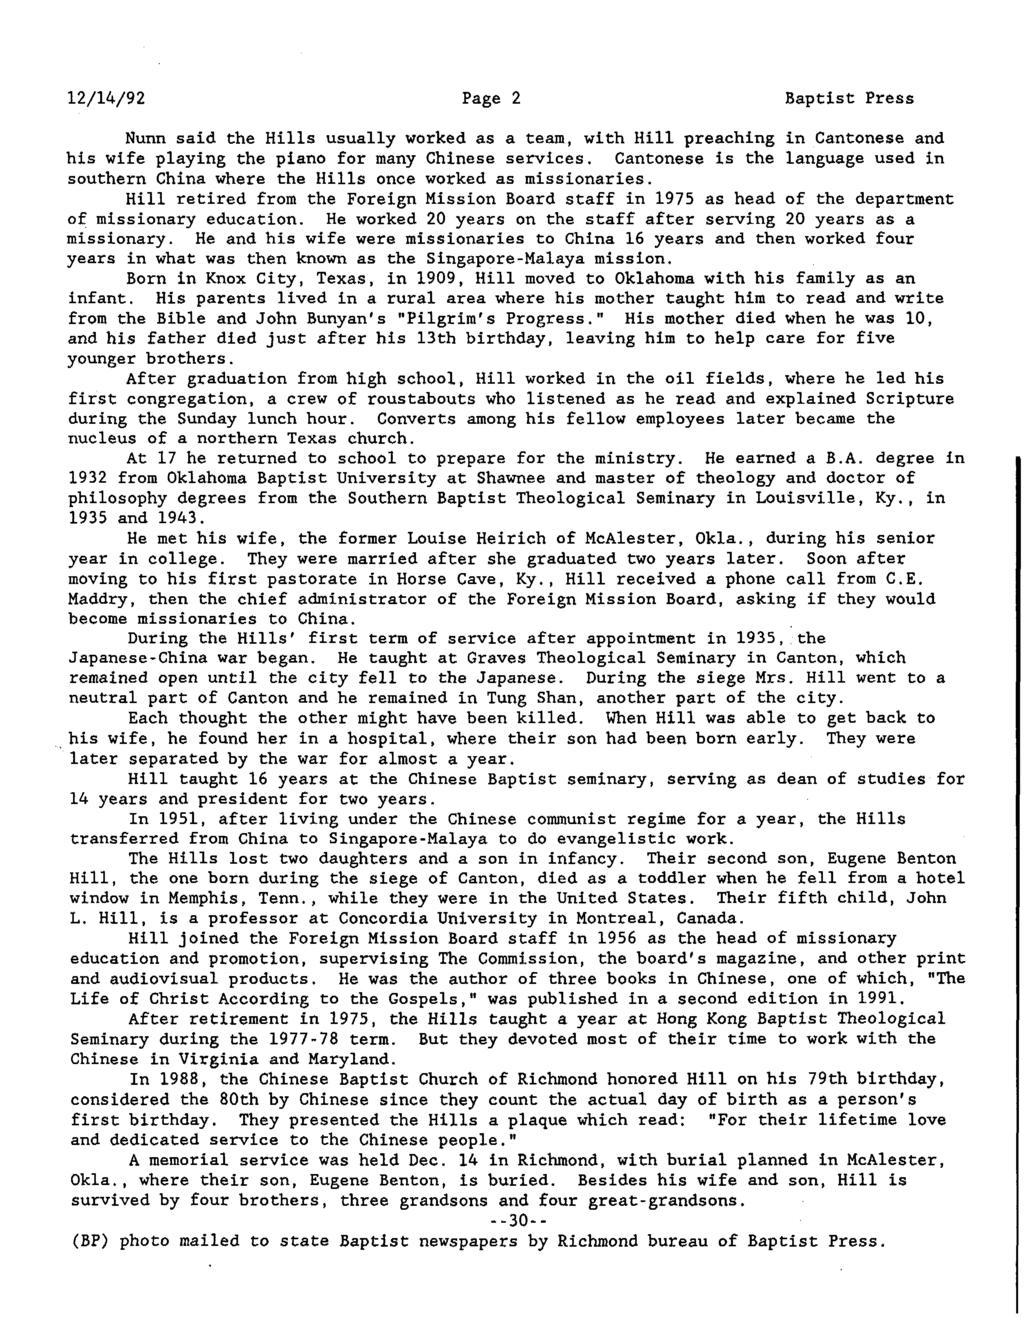 Page 2 Nunn said the Hills usually worked as a team, with Hill preaching in Cantonese and his wife playing the piano for many Chinese services.